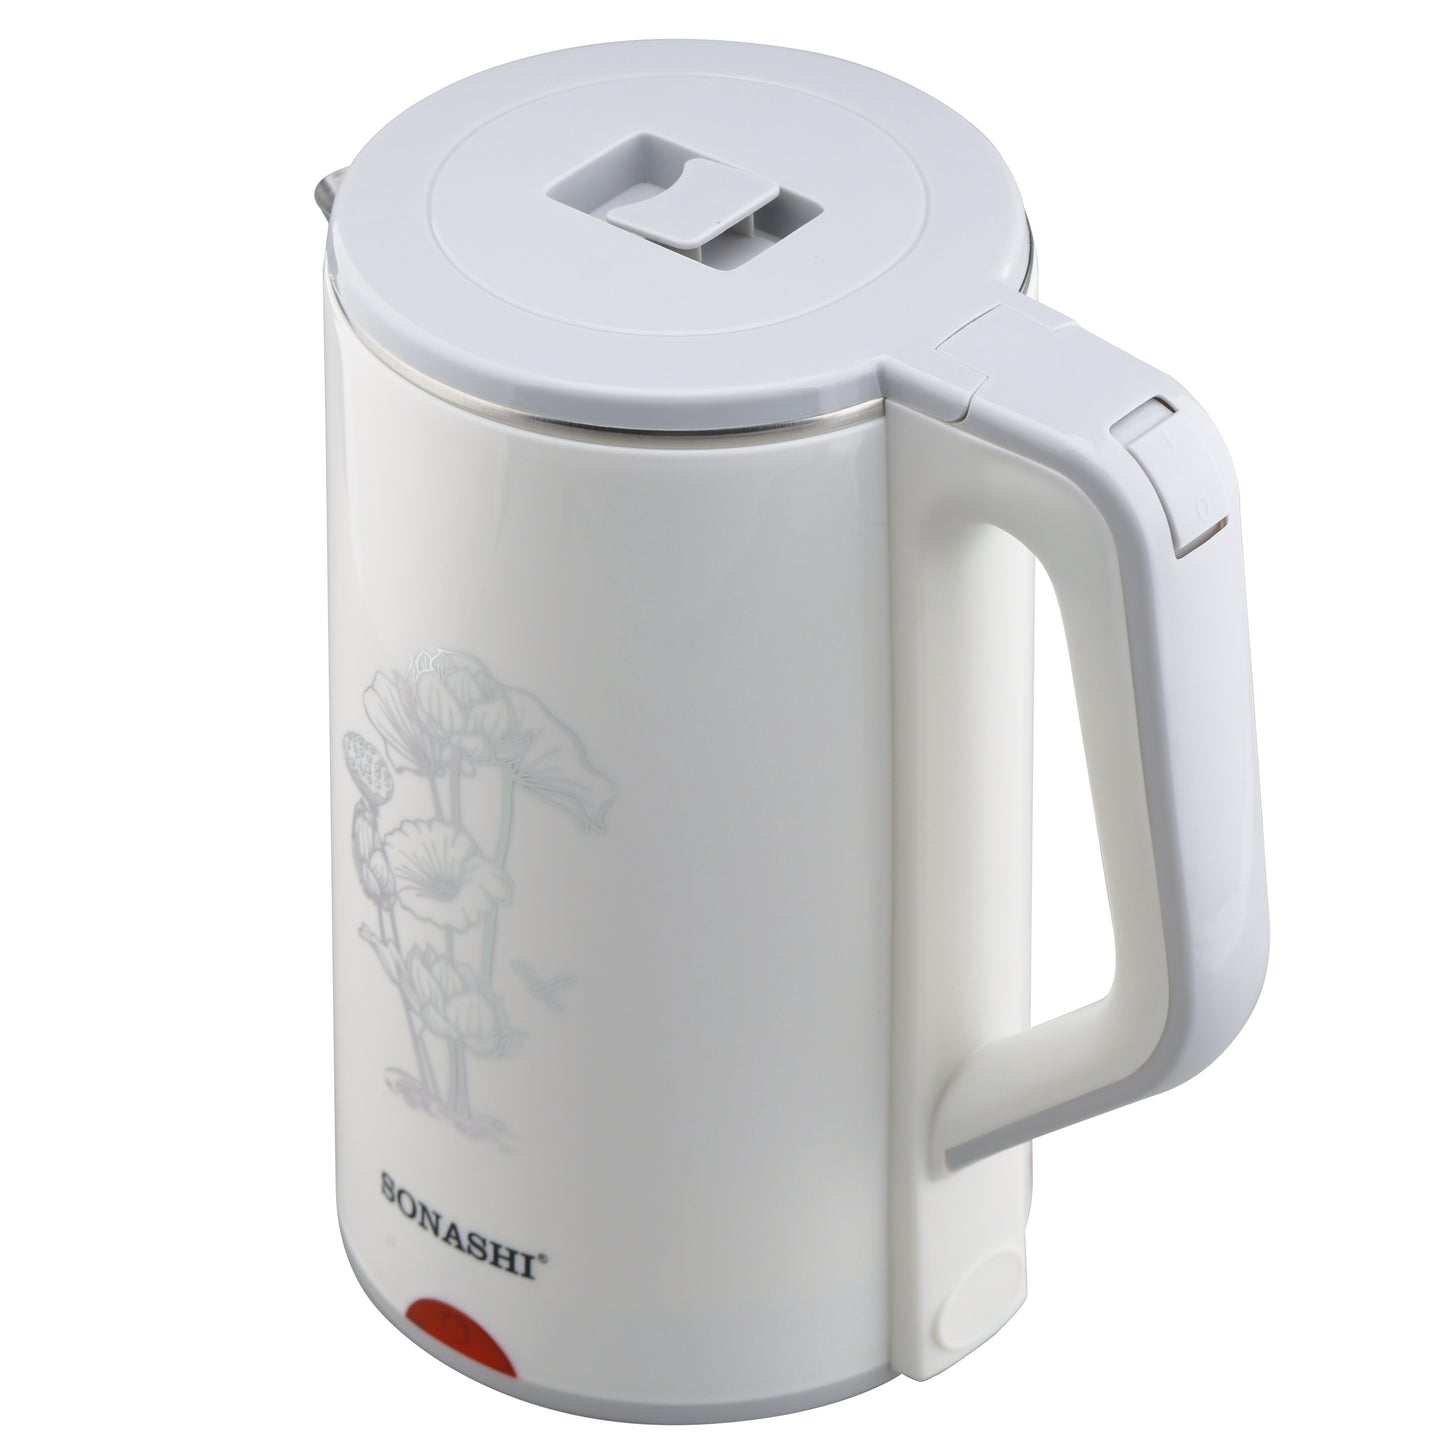 Portable electric kettle